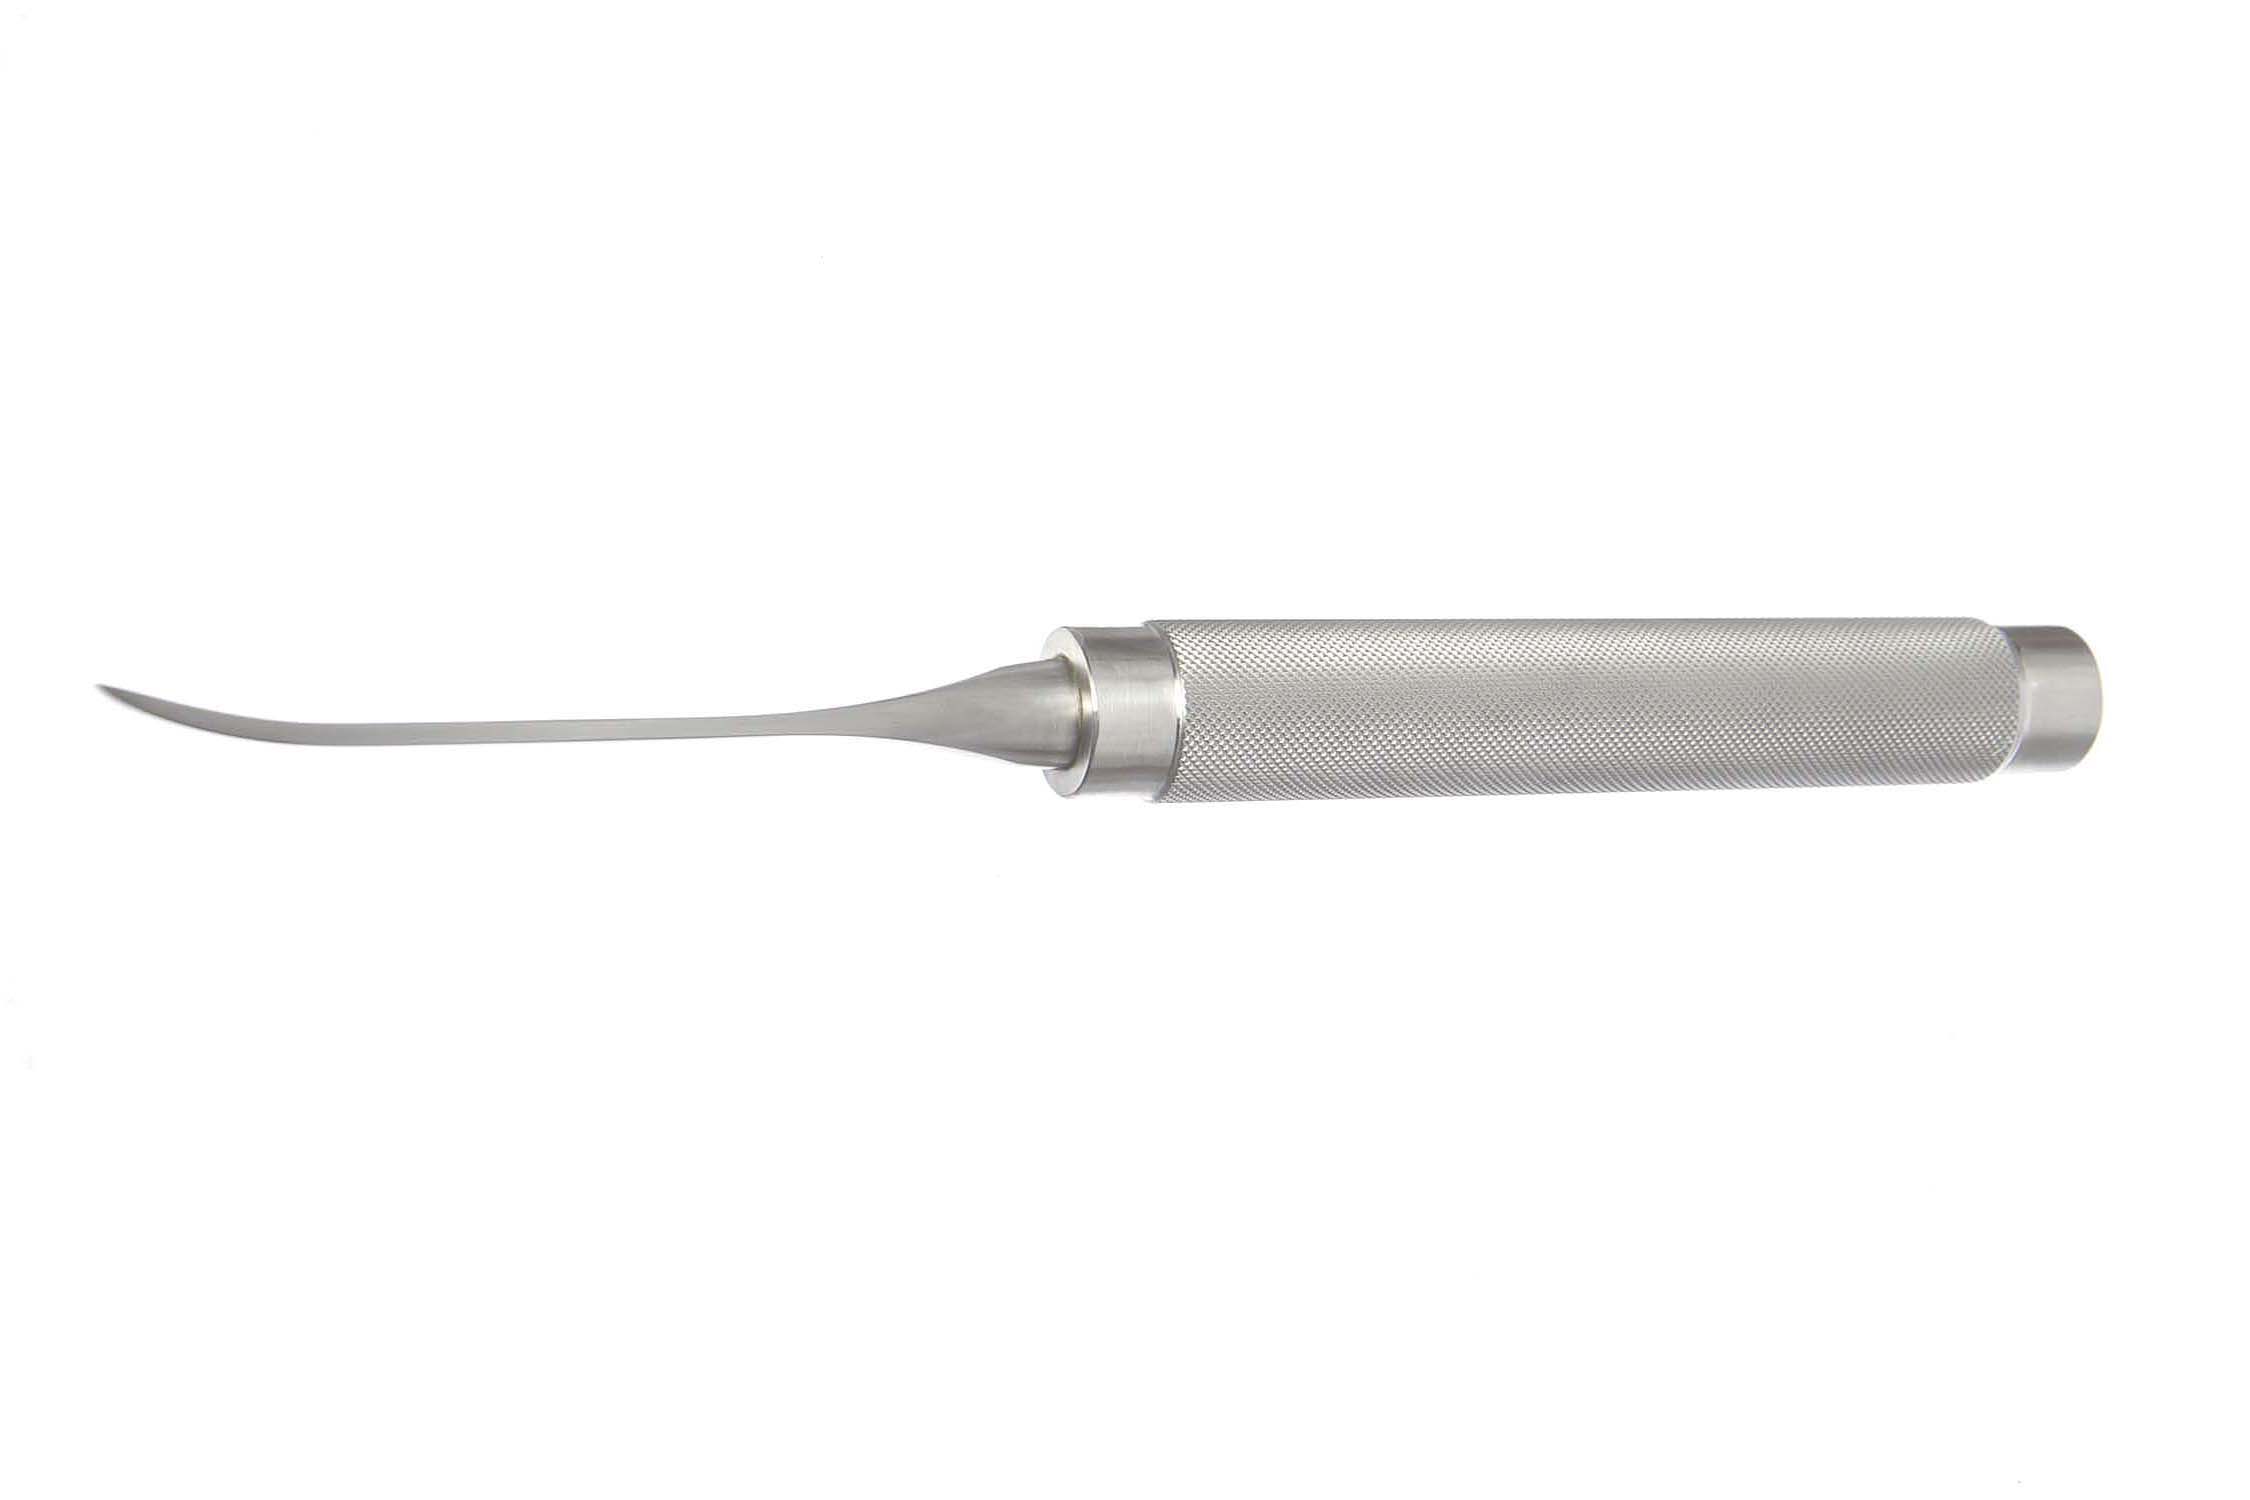 Cobb Osteotome, 11" (28.0 Cm), Curved, 1 1/4" (32.0 Mm)